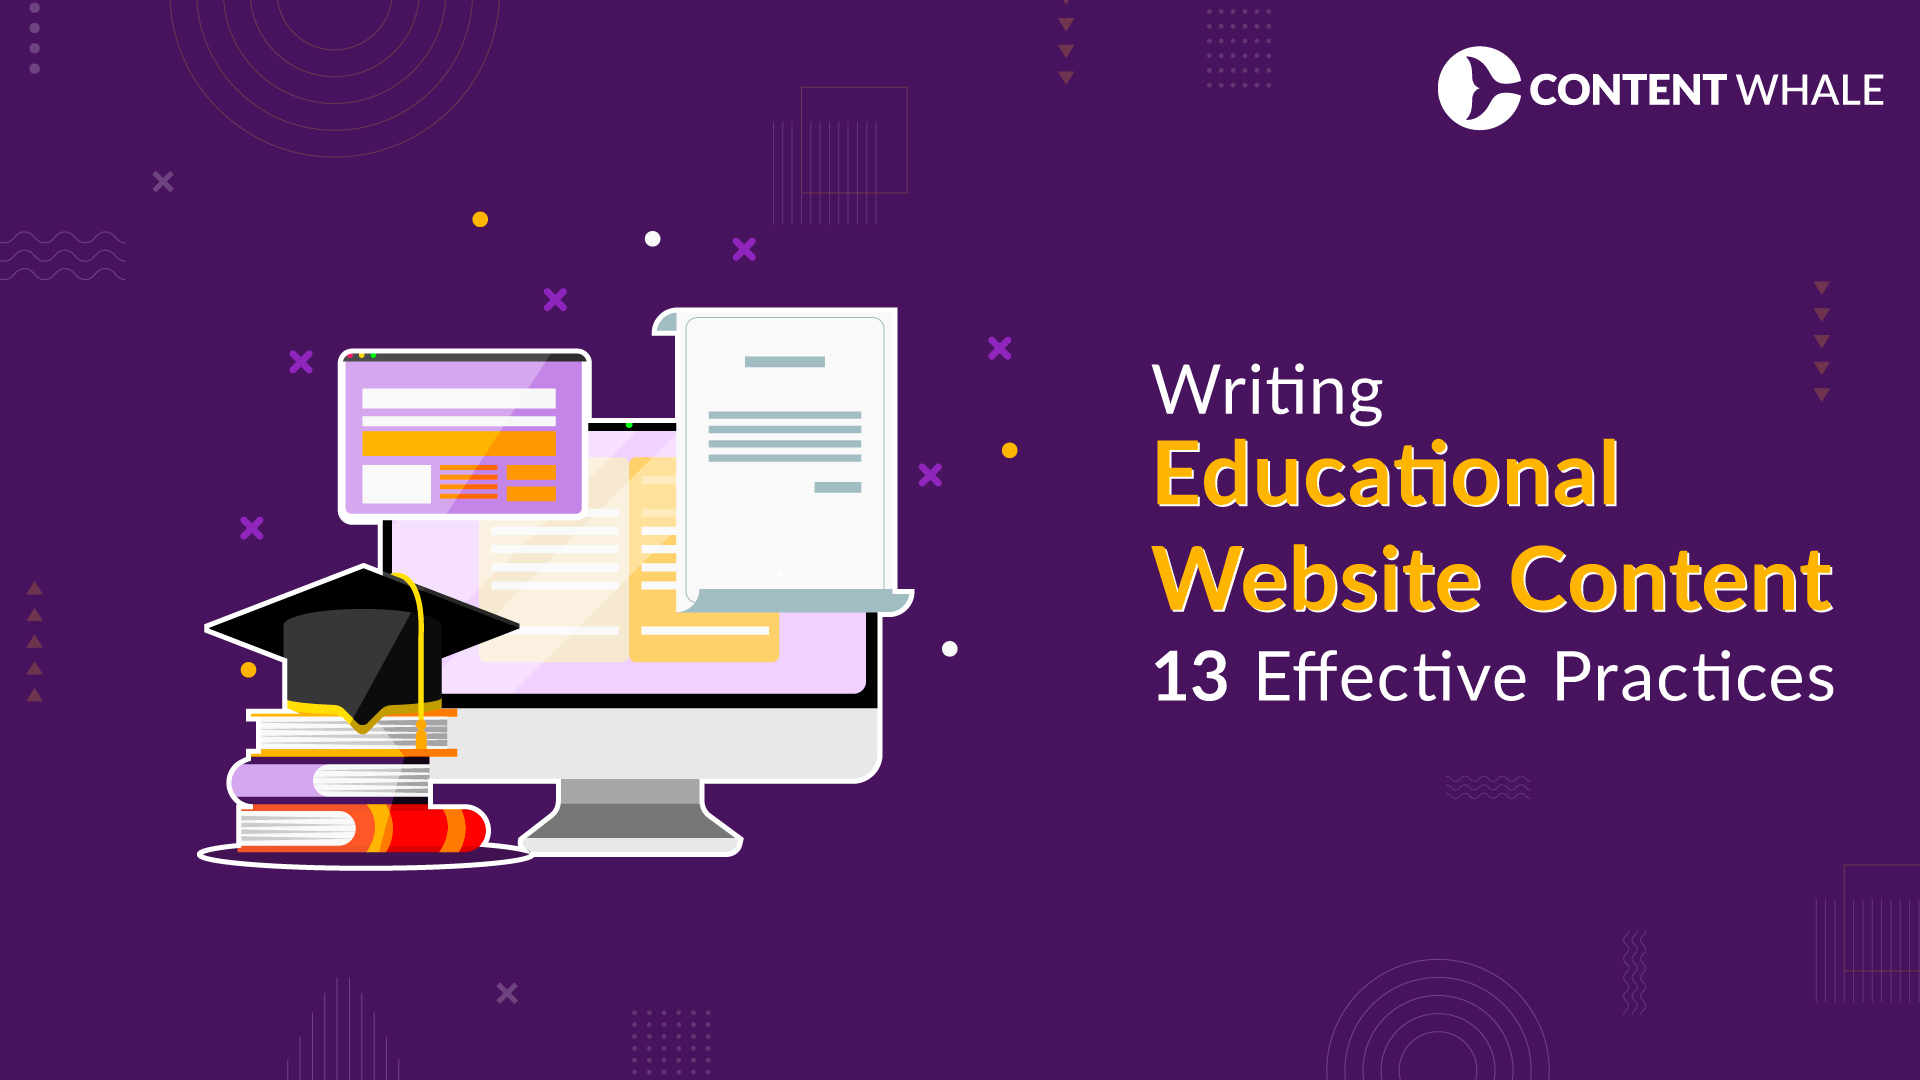 How to write the best educational website content? This image represents a blog which talks about the best practices of writing educational website content.